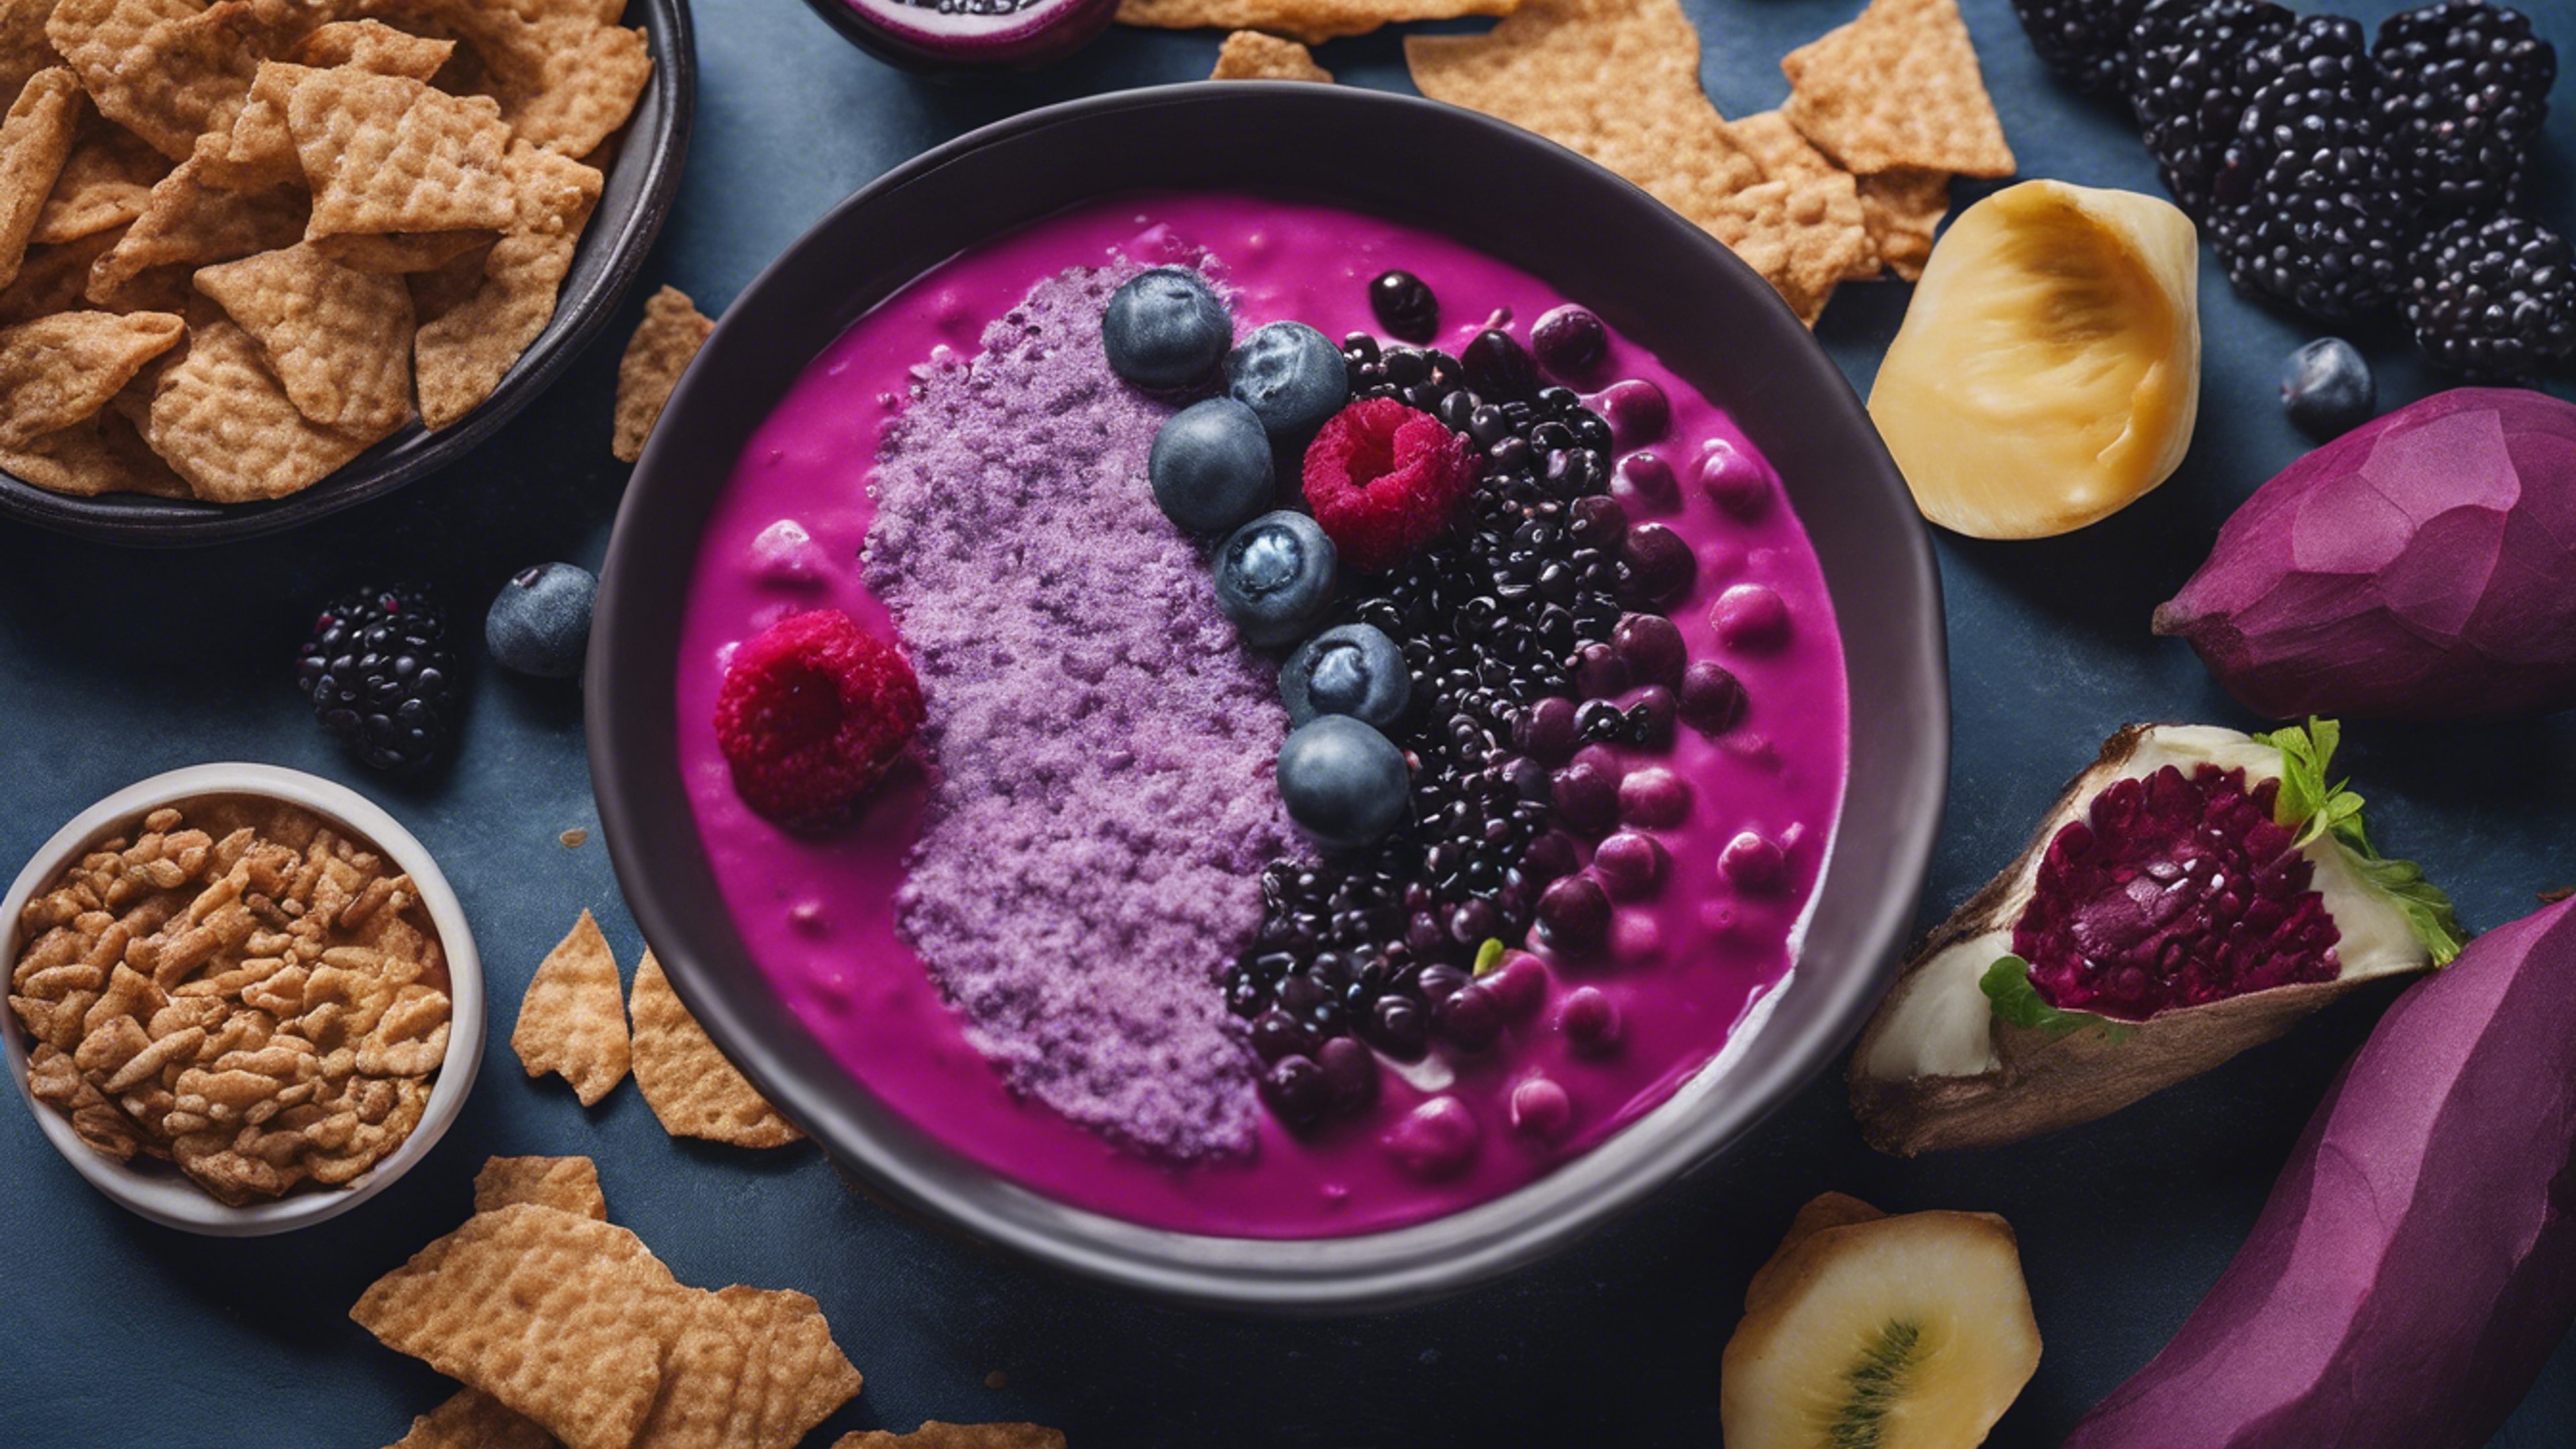 An eye-catching food collage, with purple foods like acai bowls, blue corn chips, and beetroot soup.壁紙[72264552455b47748fee]